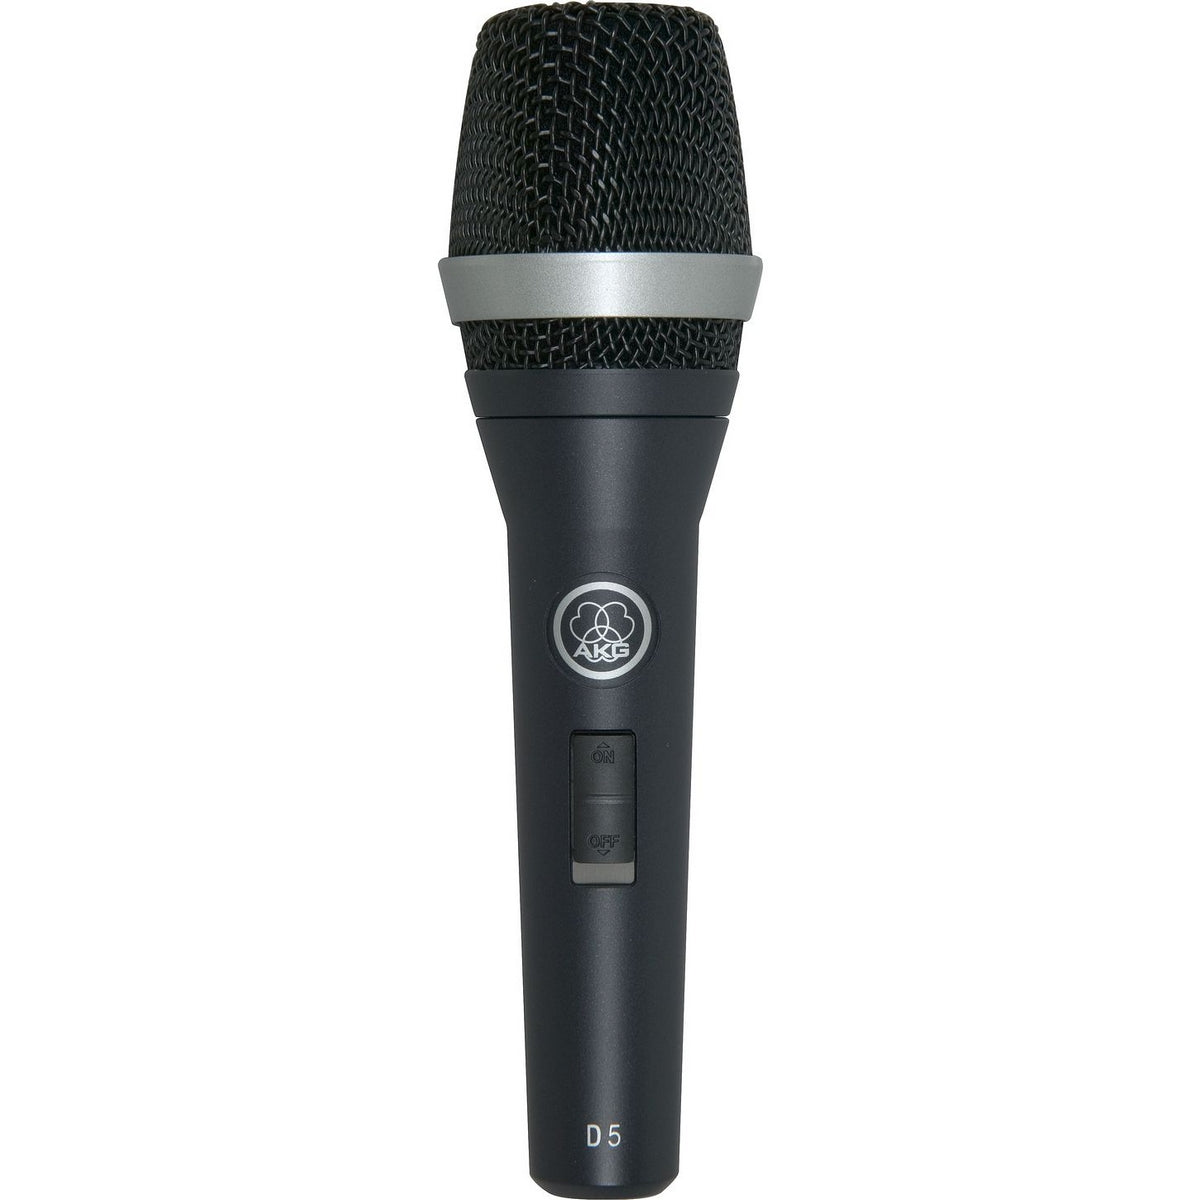 AKG D5S | Professional Super Cardioid Dynamic Vocal Microphone On Off Switch